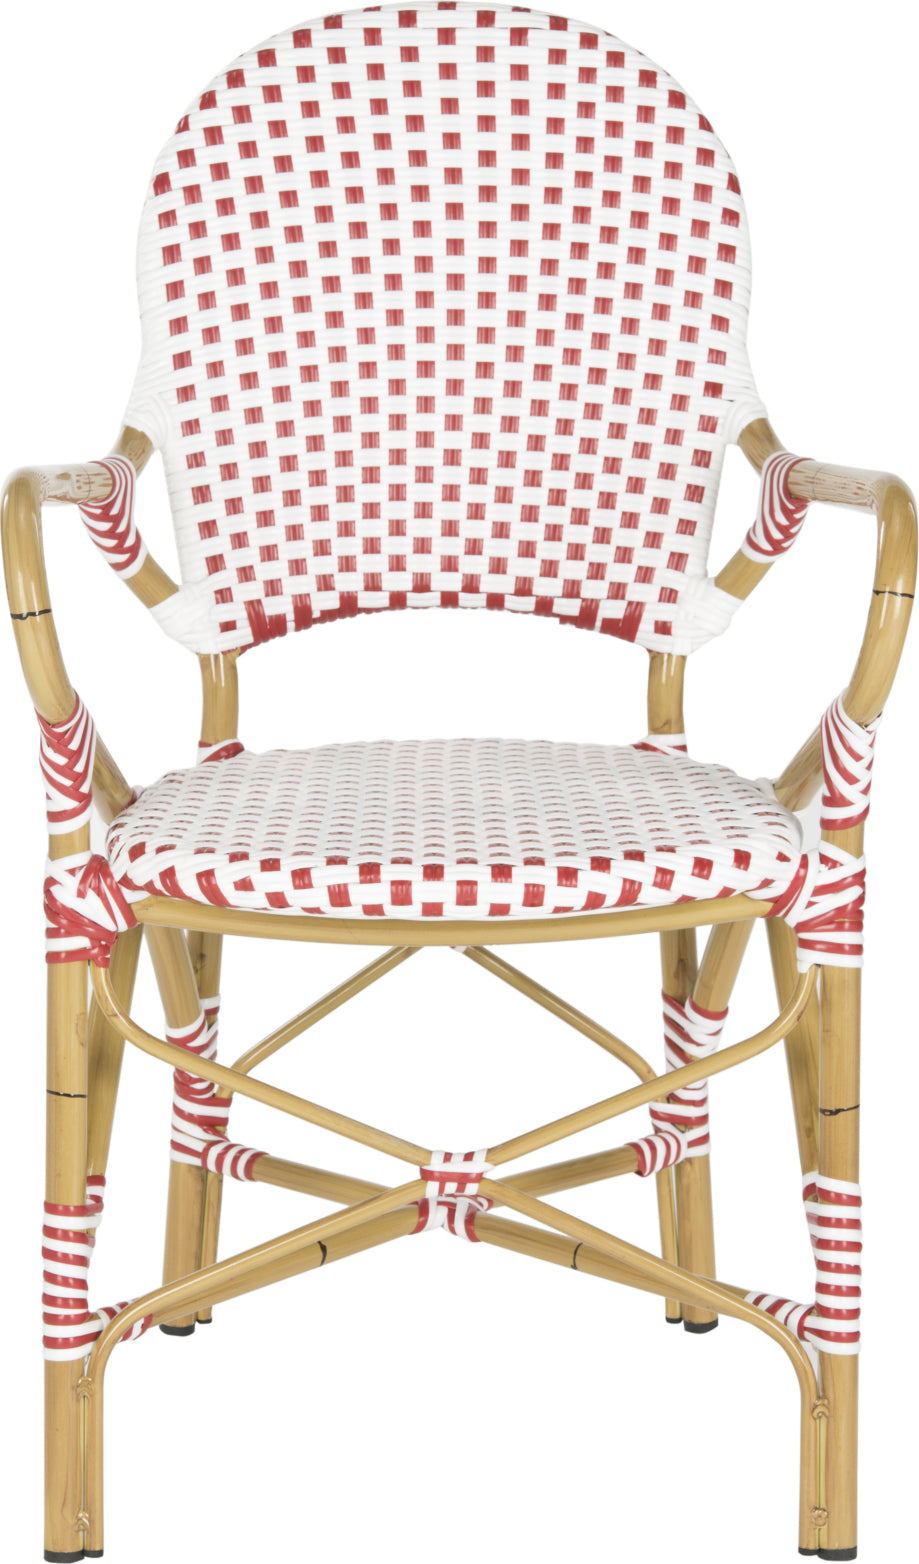 Safavieh Hooper Indoor-Outdoor Stacking Armchair Red and White Furniture main image